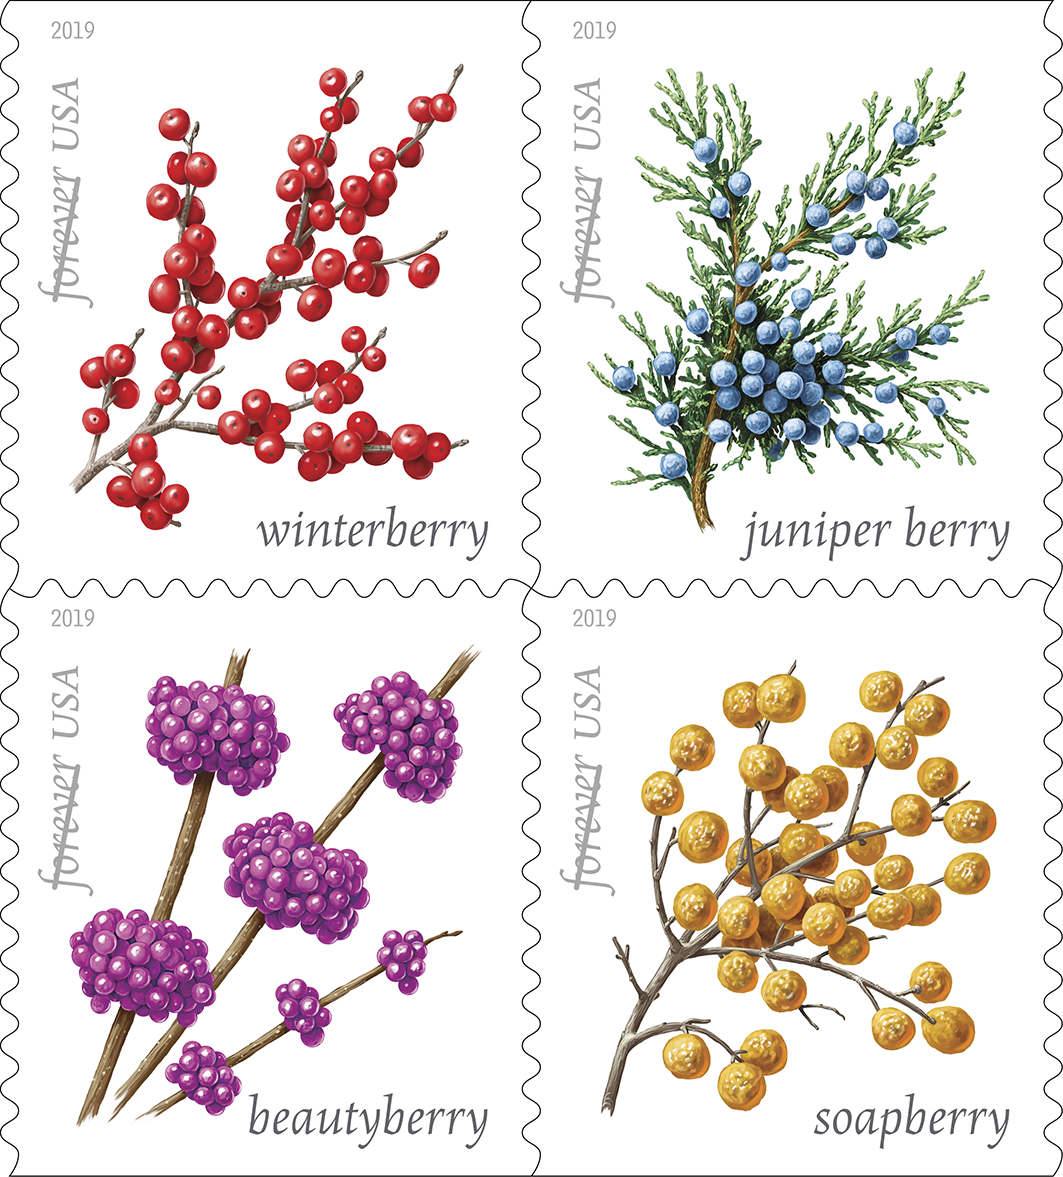 Winter Berries Forever Stamps On Sale Today Nationwide